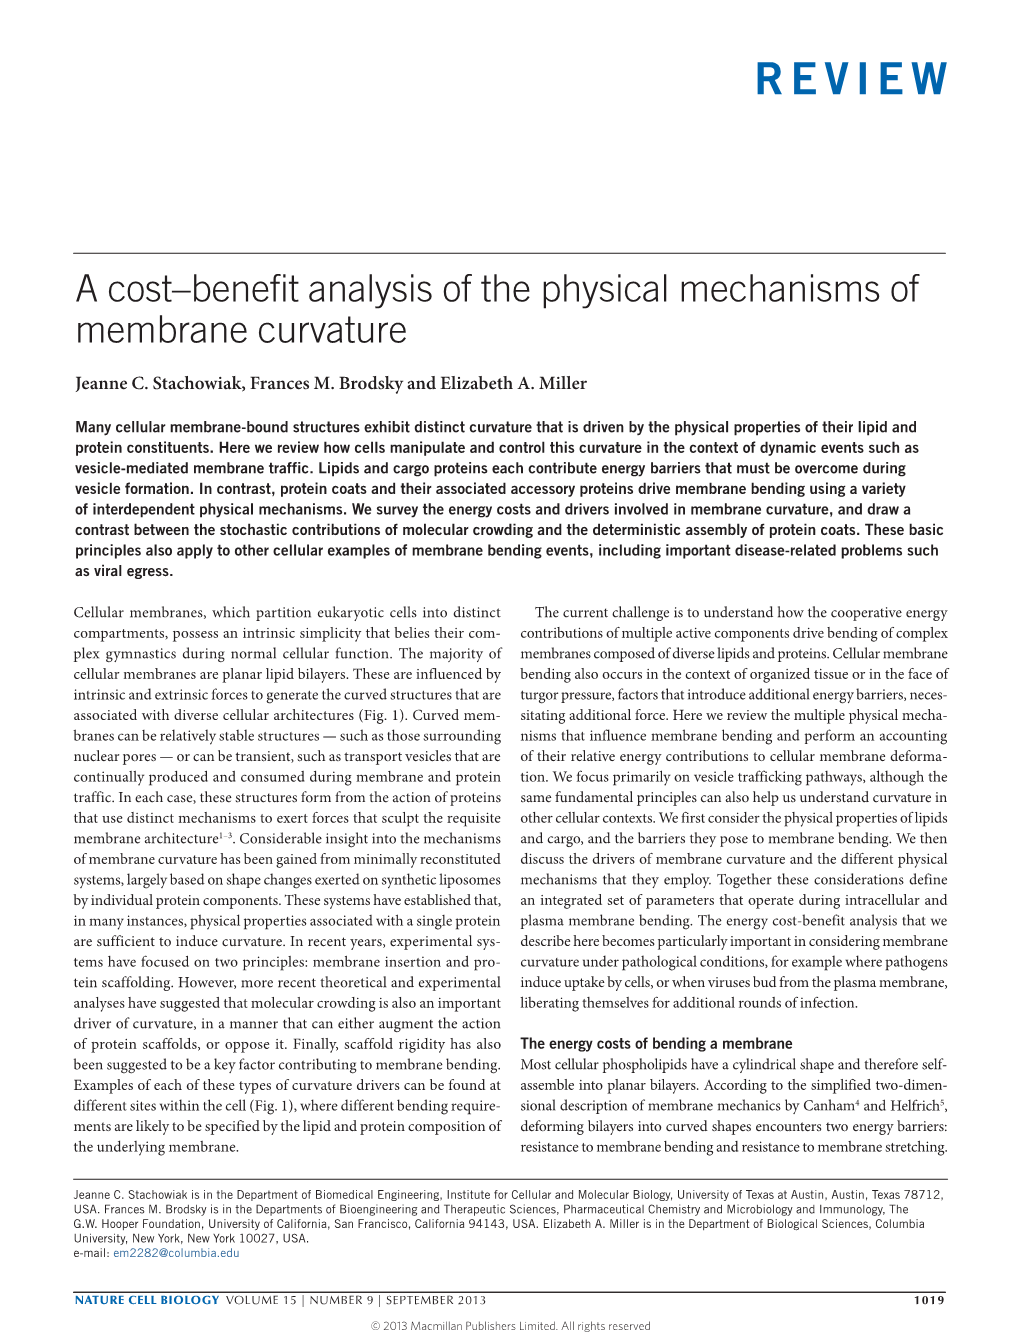 A Cost–Benefit Analysis of the Physical Mechanisms of Membrane Curvature